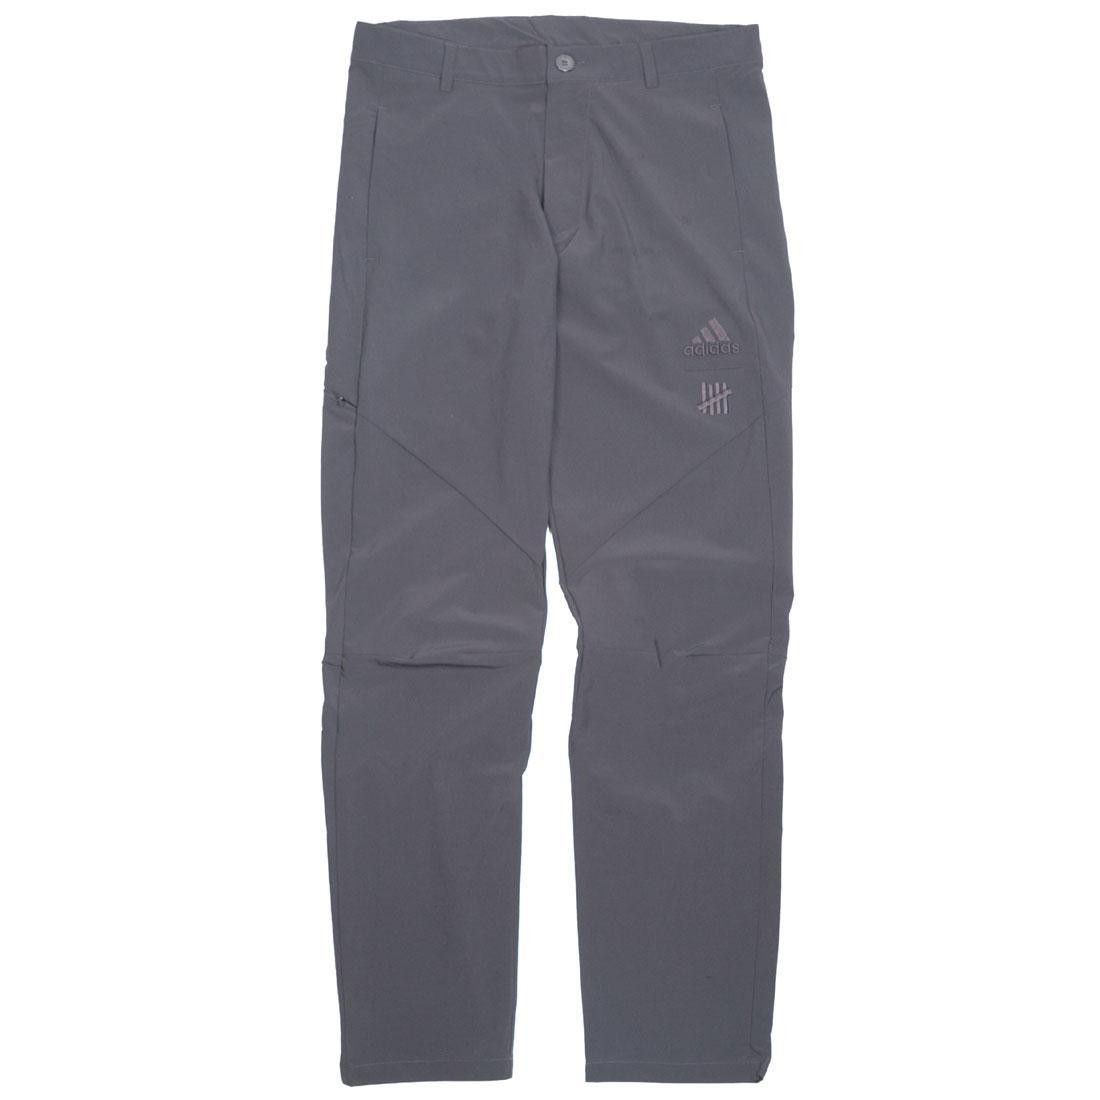 Adidas x Undefeated Men Outerwear Pants 